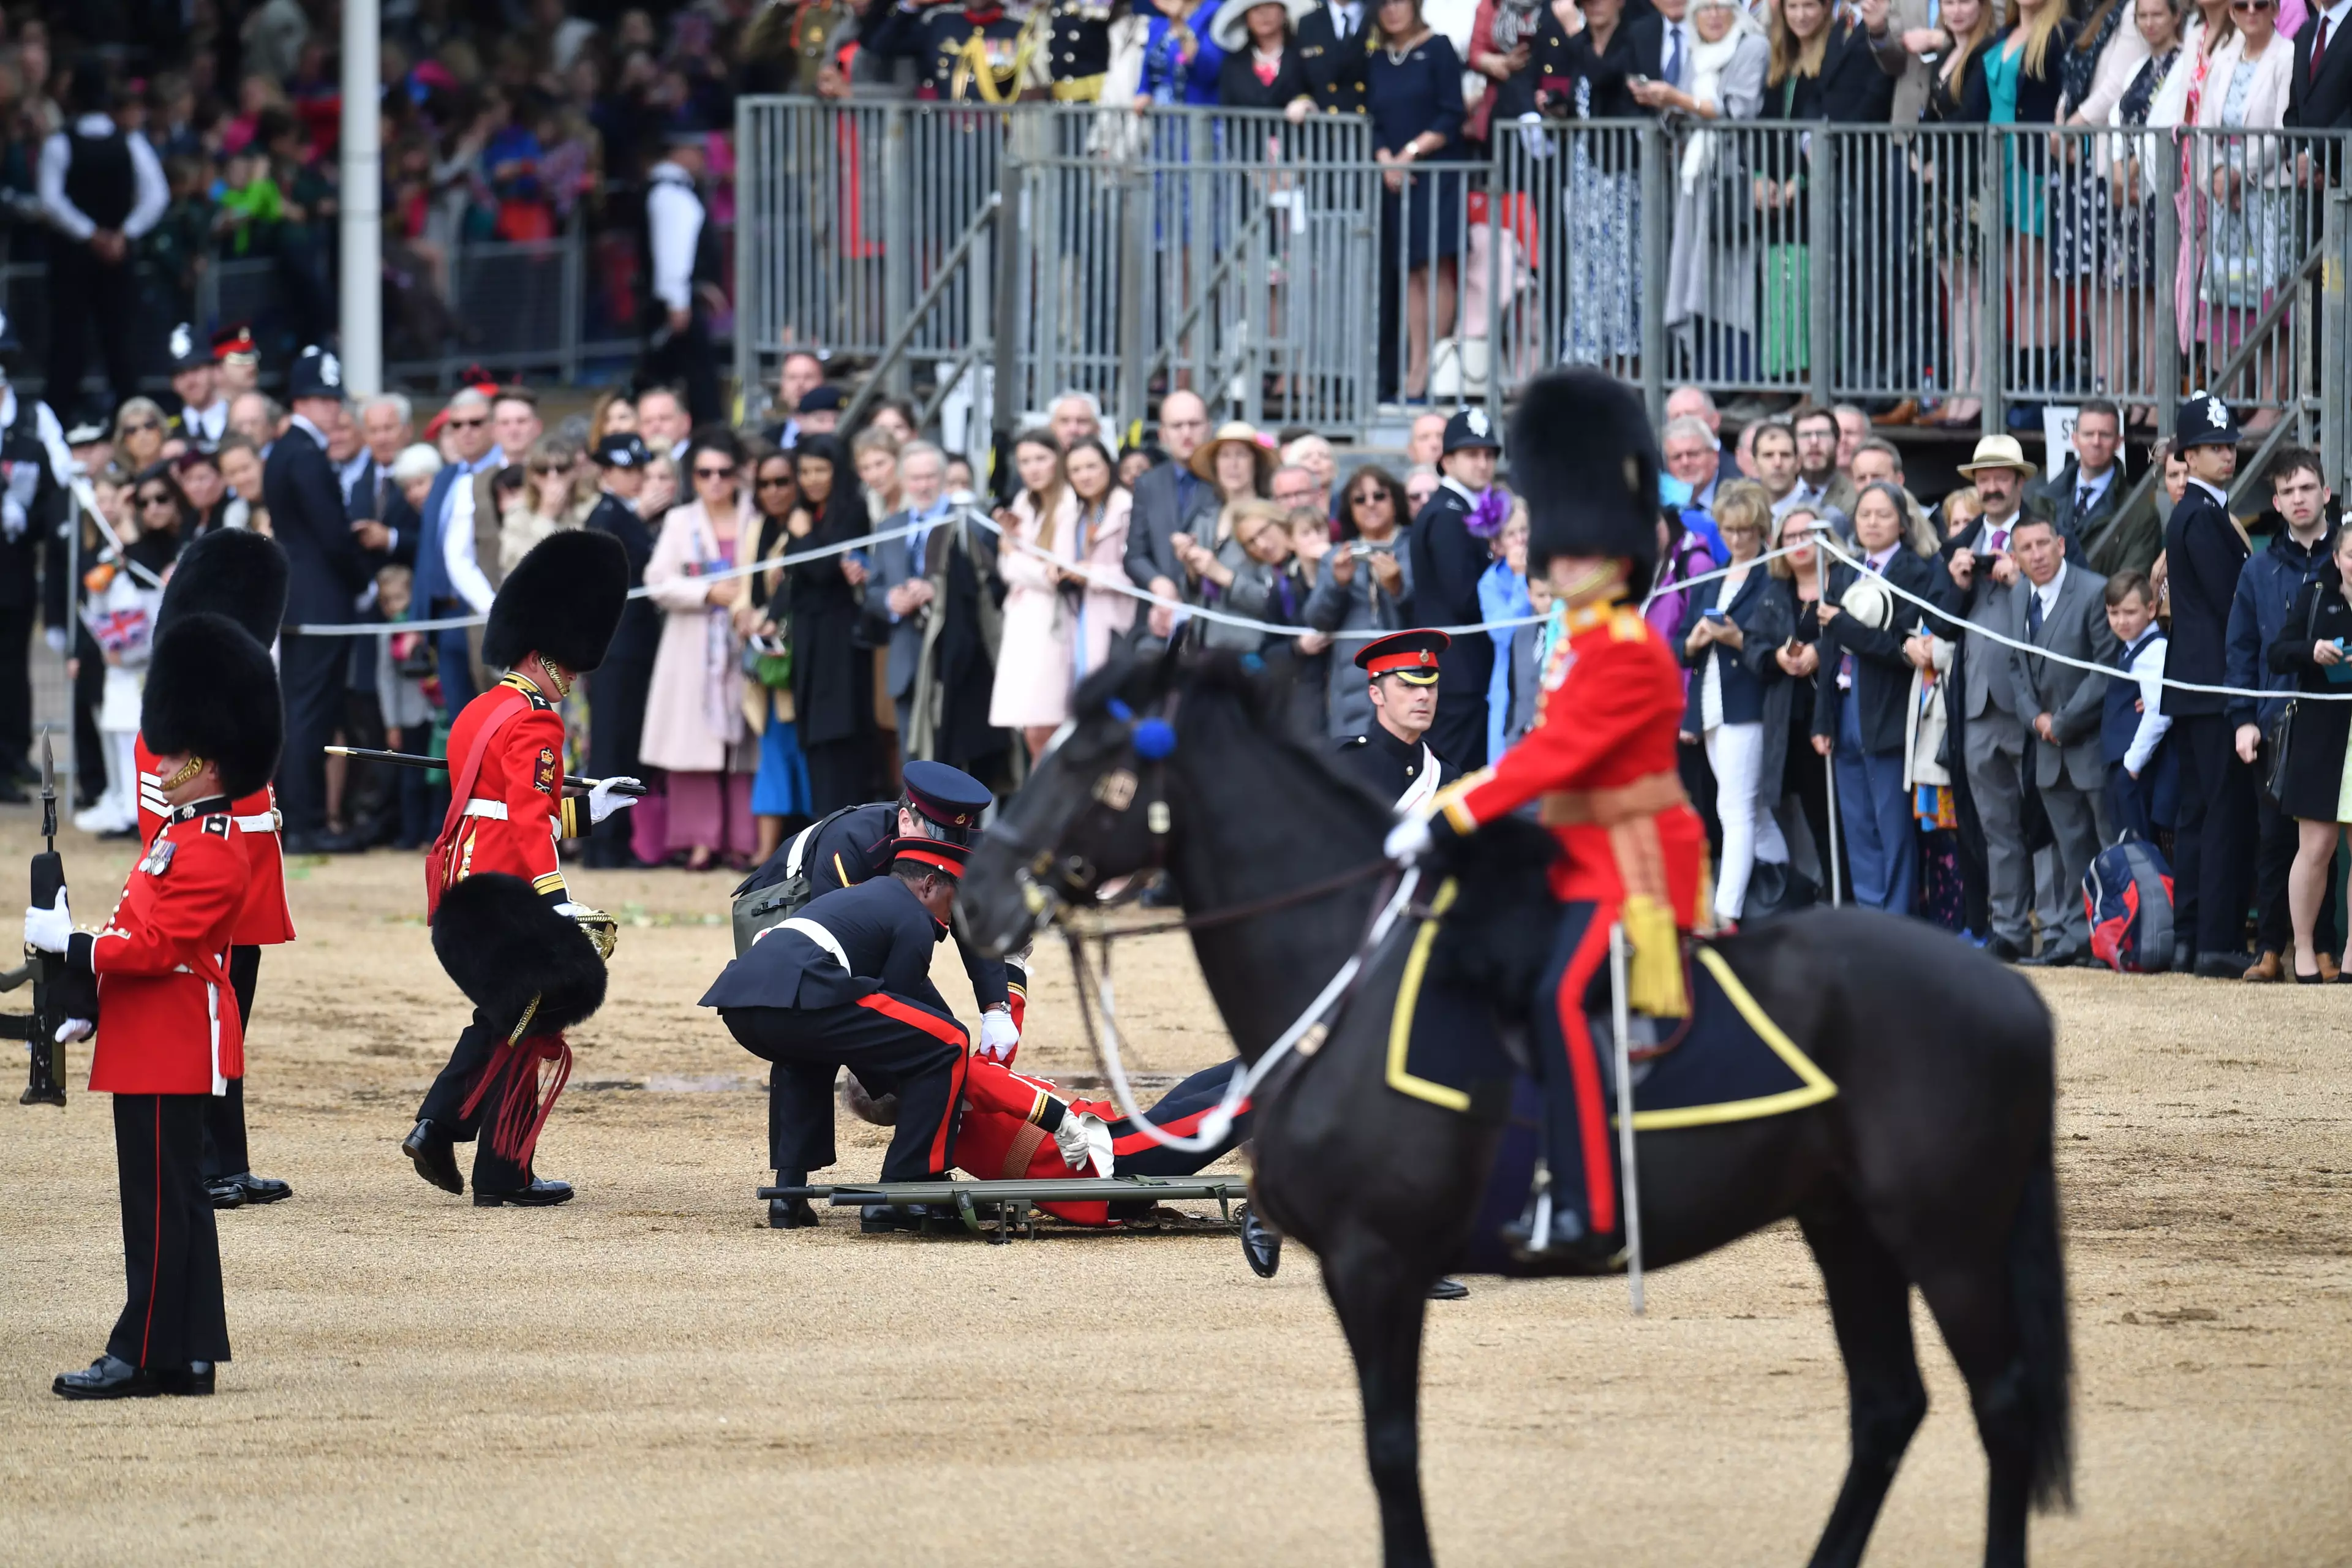 Major Hall was thrown from his horse during the Queens' birthday celebrations.